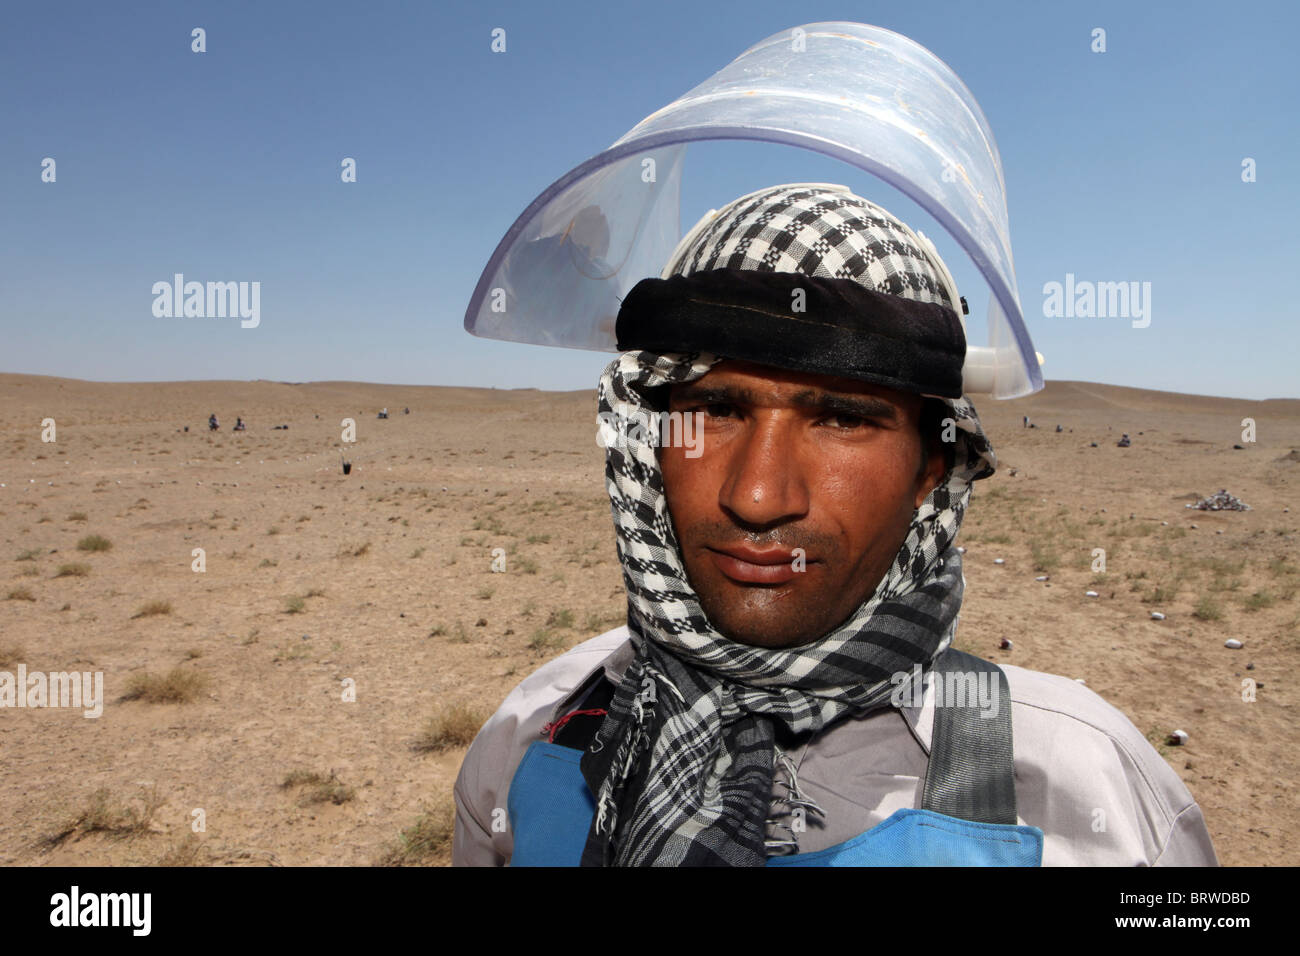 Halo trust clears minefields in Afghanistan Stock Photo